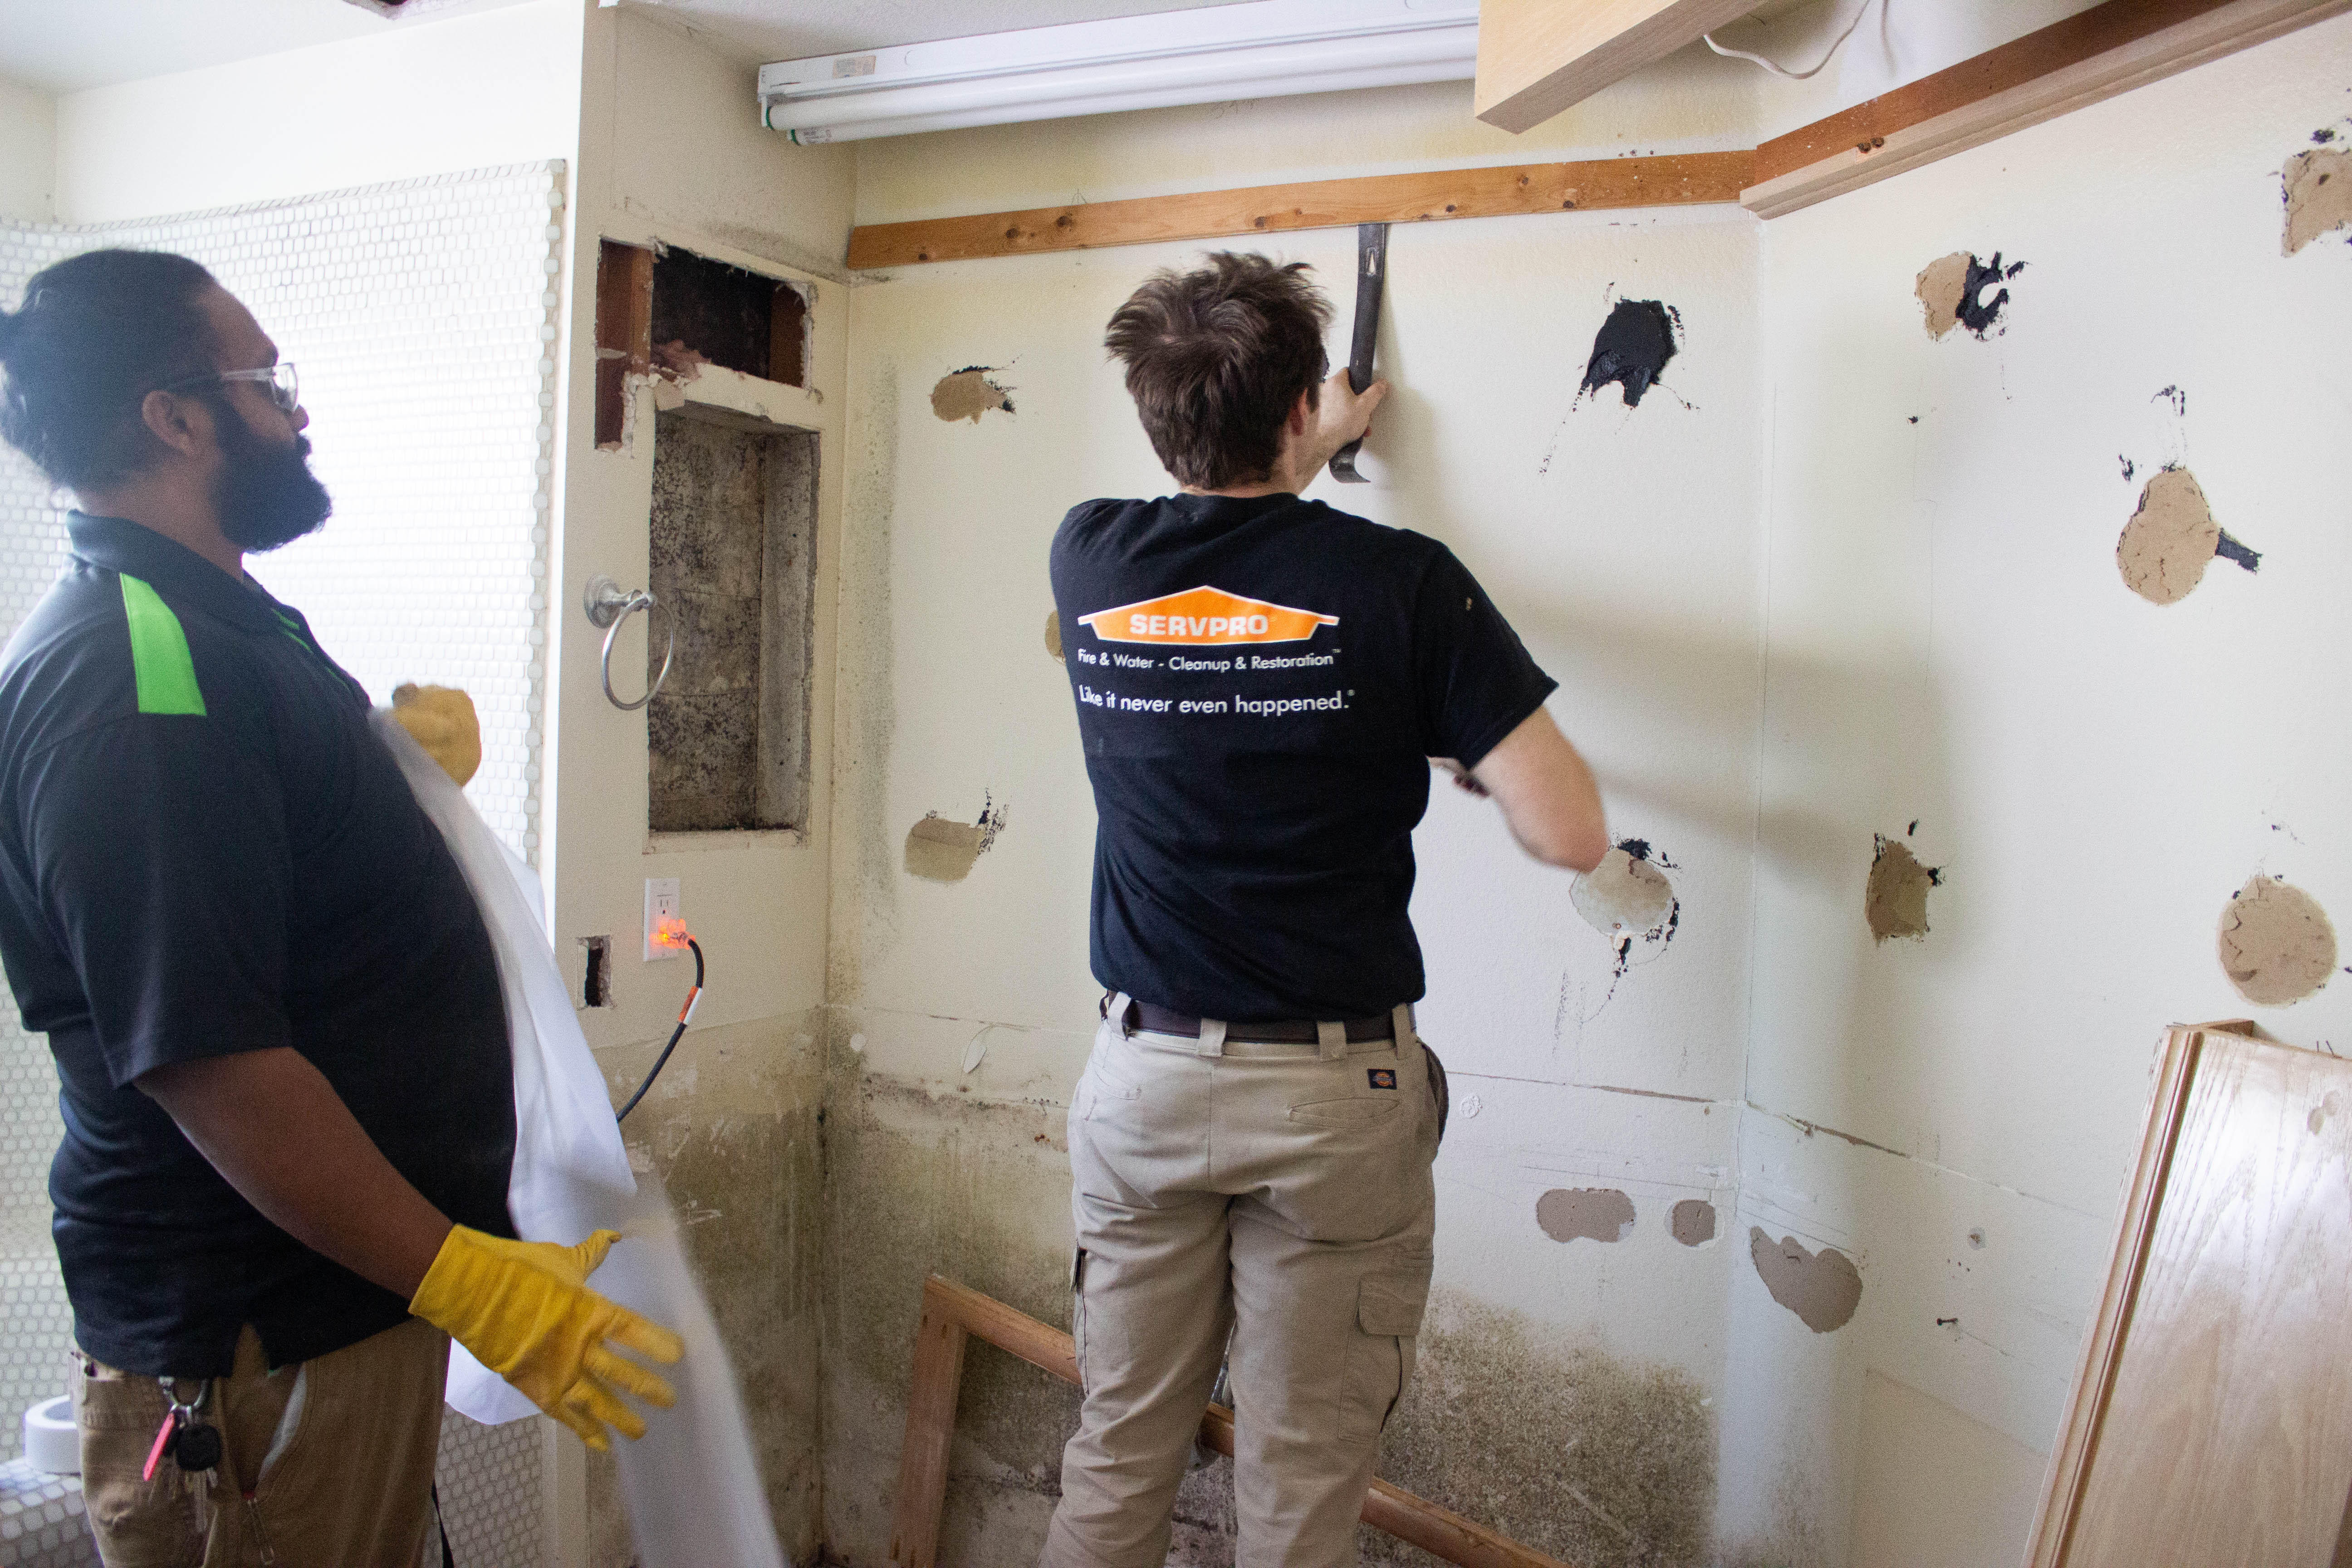 SERVPRO of San Diego East is a company that specializes in fire, mold, and water damage restoration. We have considerable restoration experience and can help you restore your Lake Murray, CA property to its pre-damage state. Please give us a call!